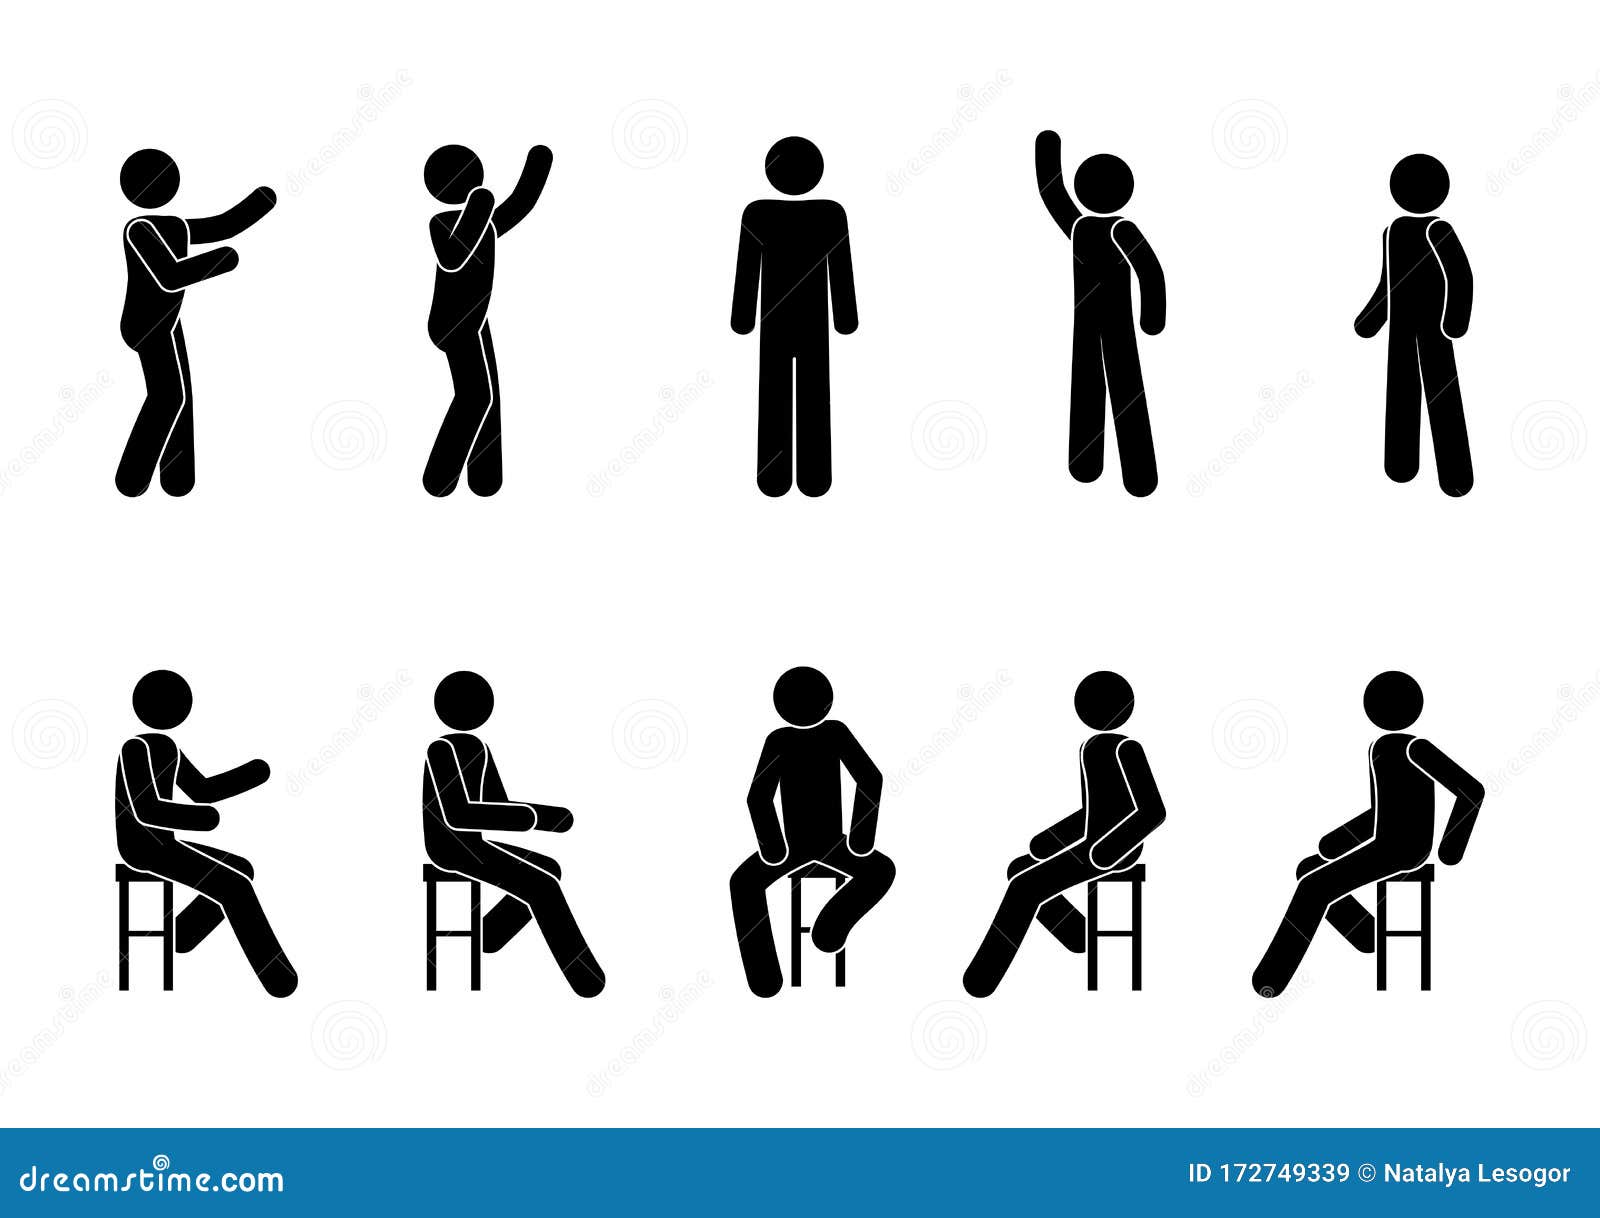 Pictogram People Sit and Stand, Man Icon, Human Silhouette in Various ...